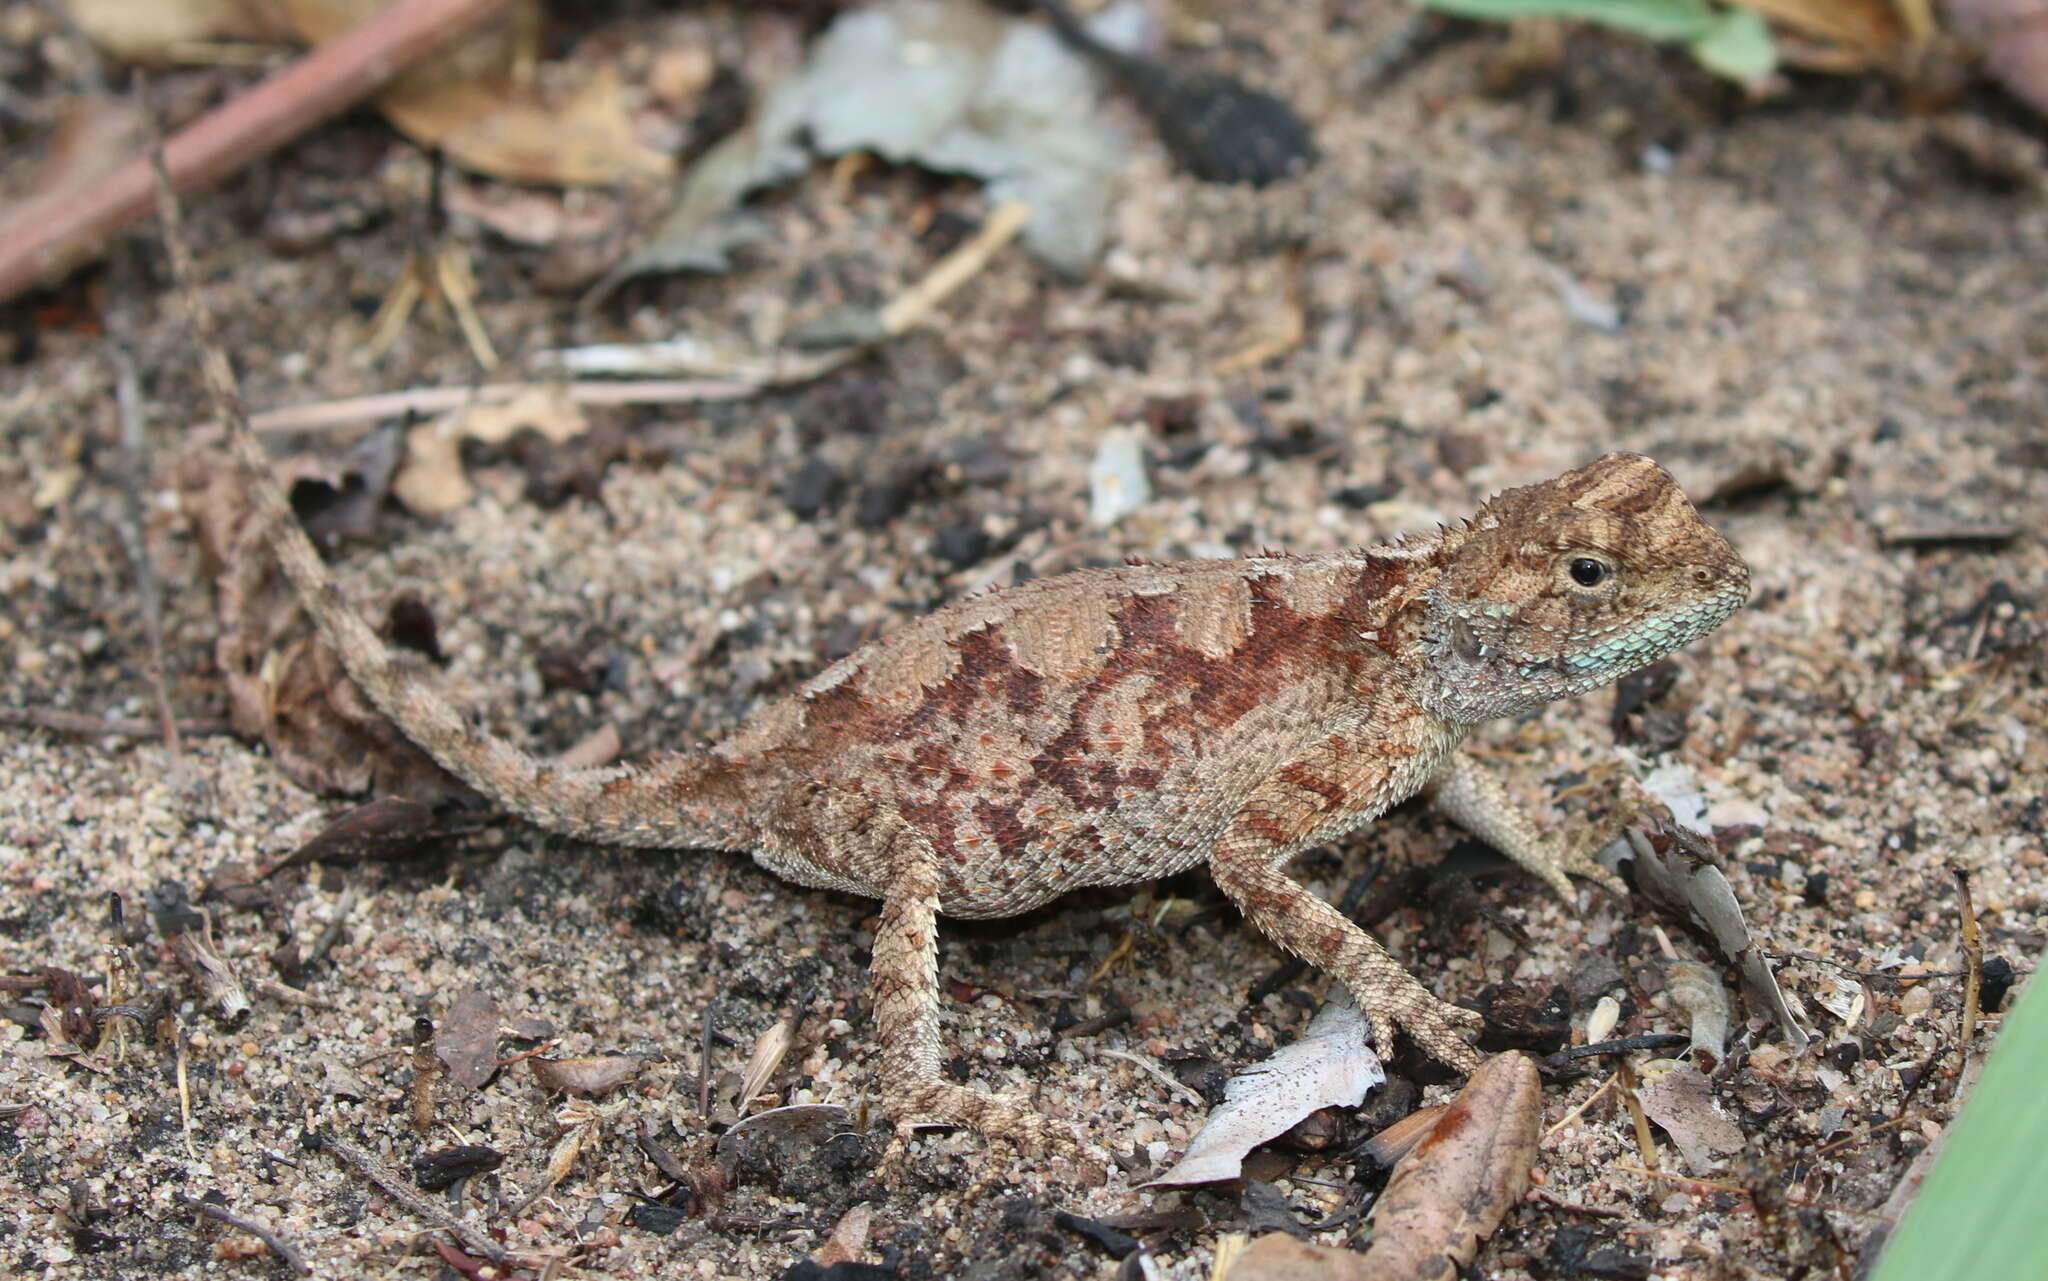 Image of Peters' ground agama